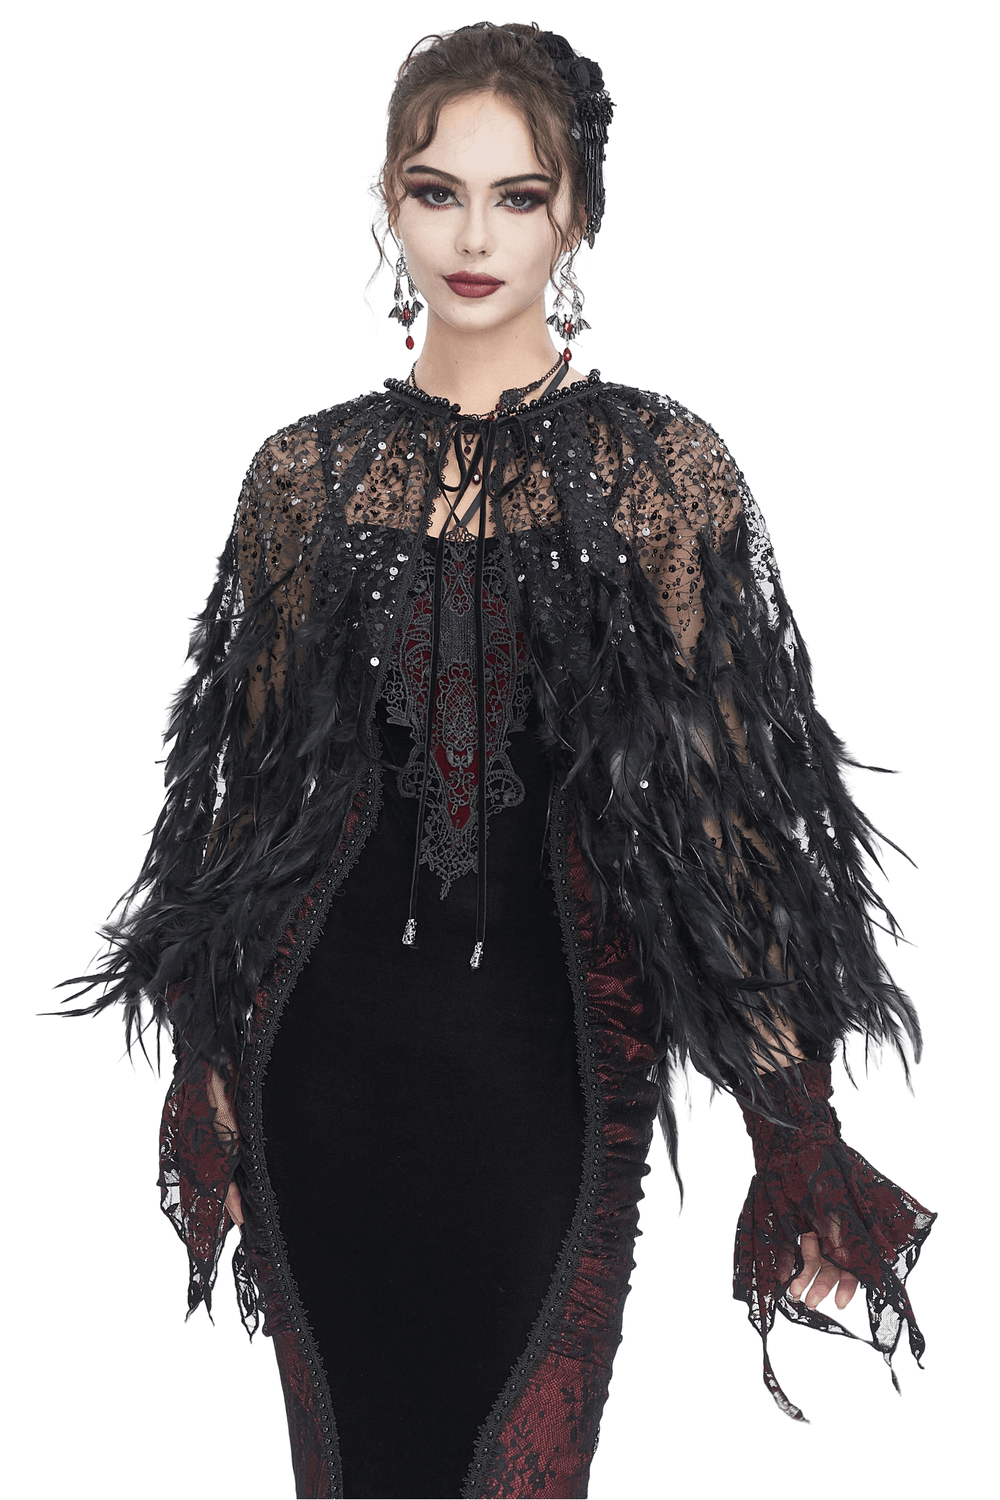 Women's Black Sequin Cape with Real Feather Trim